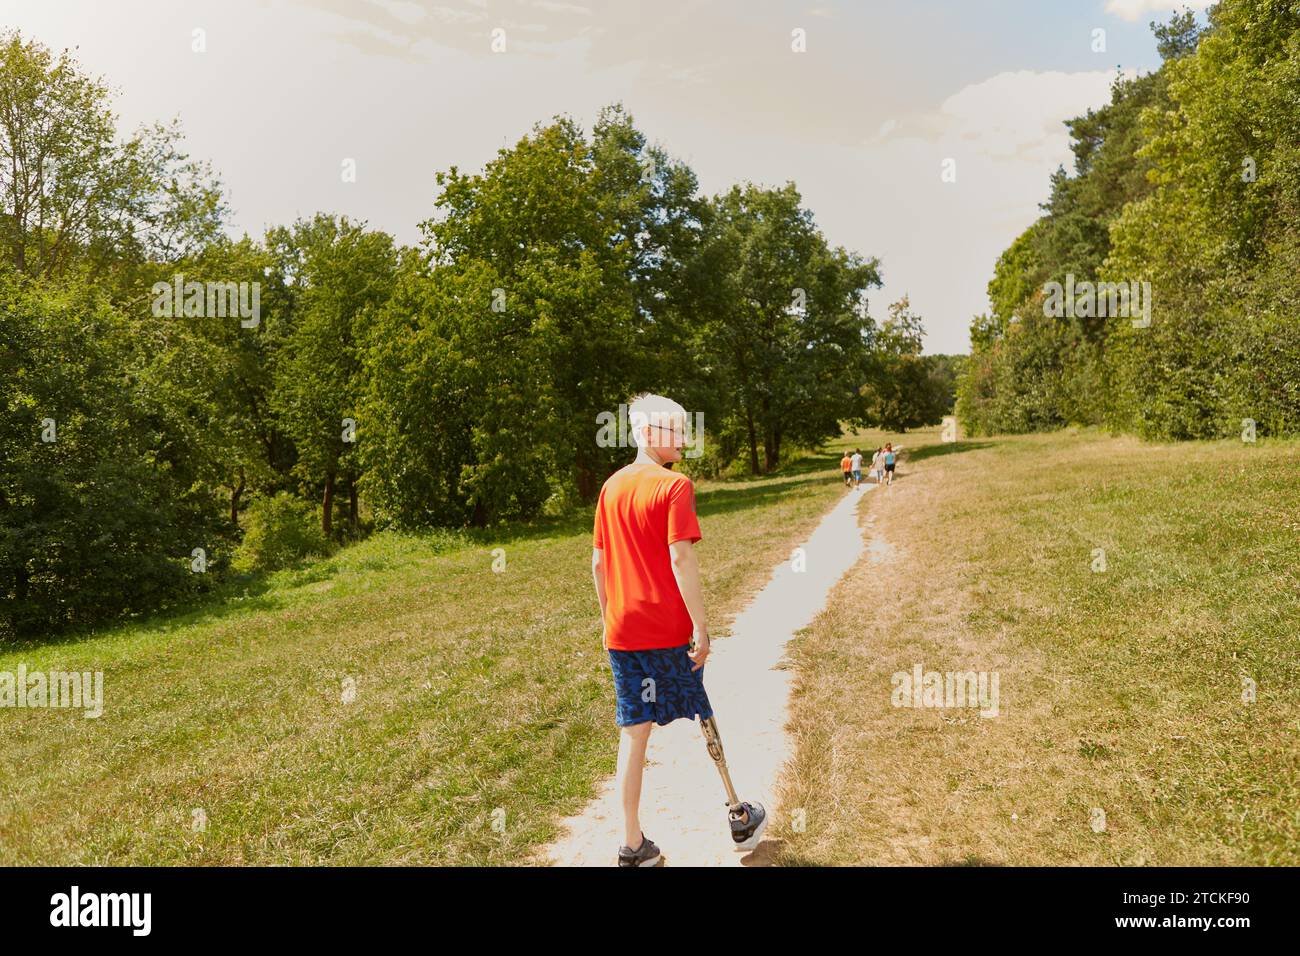 Full length of boy with prosthetic leg walking on footpath at park Stock Photo